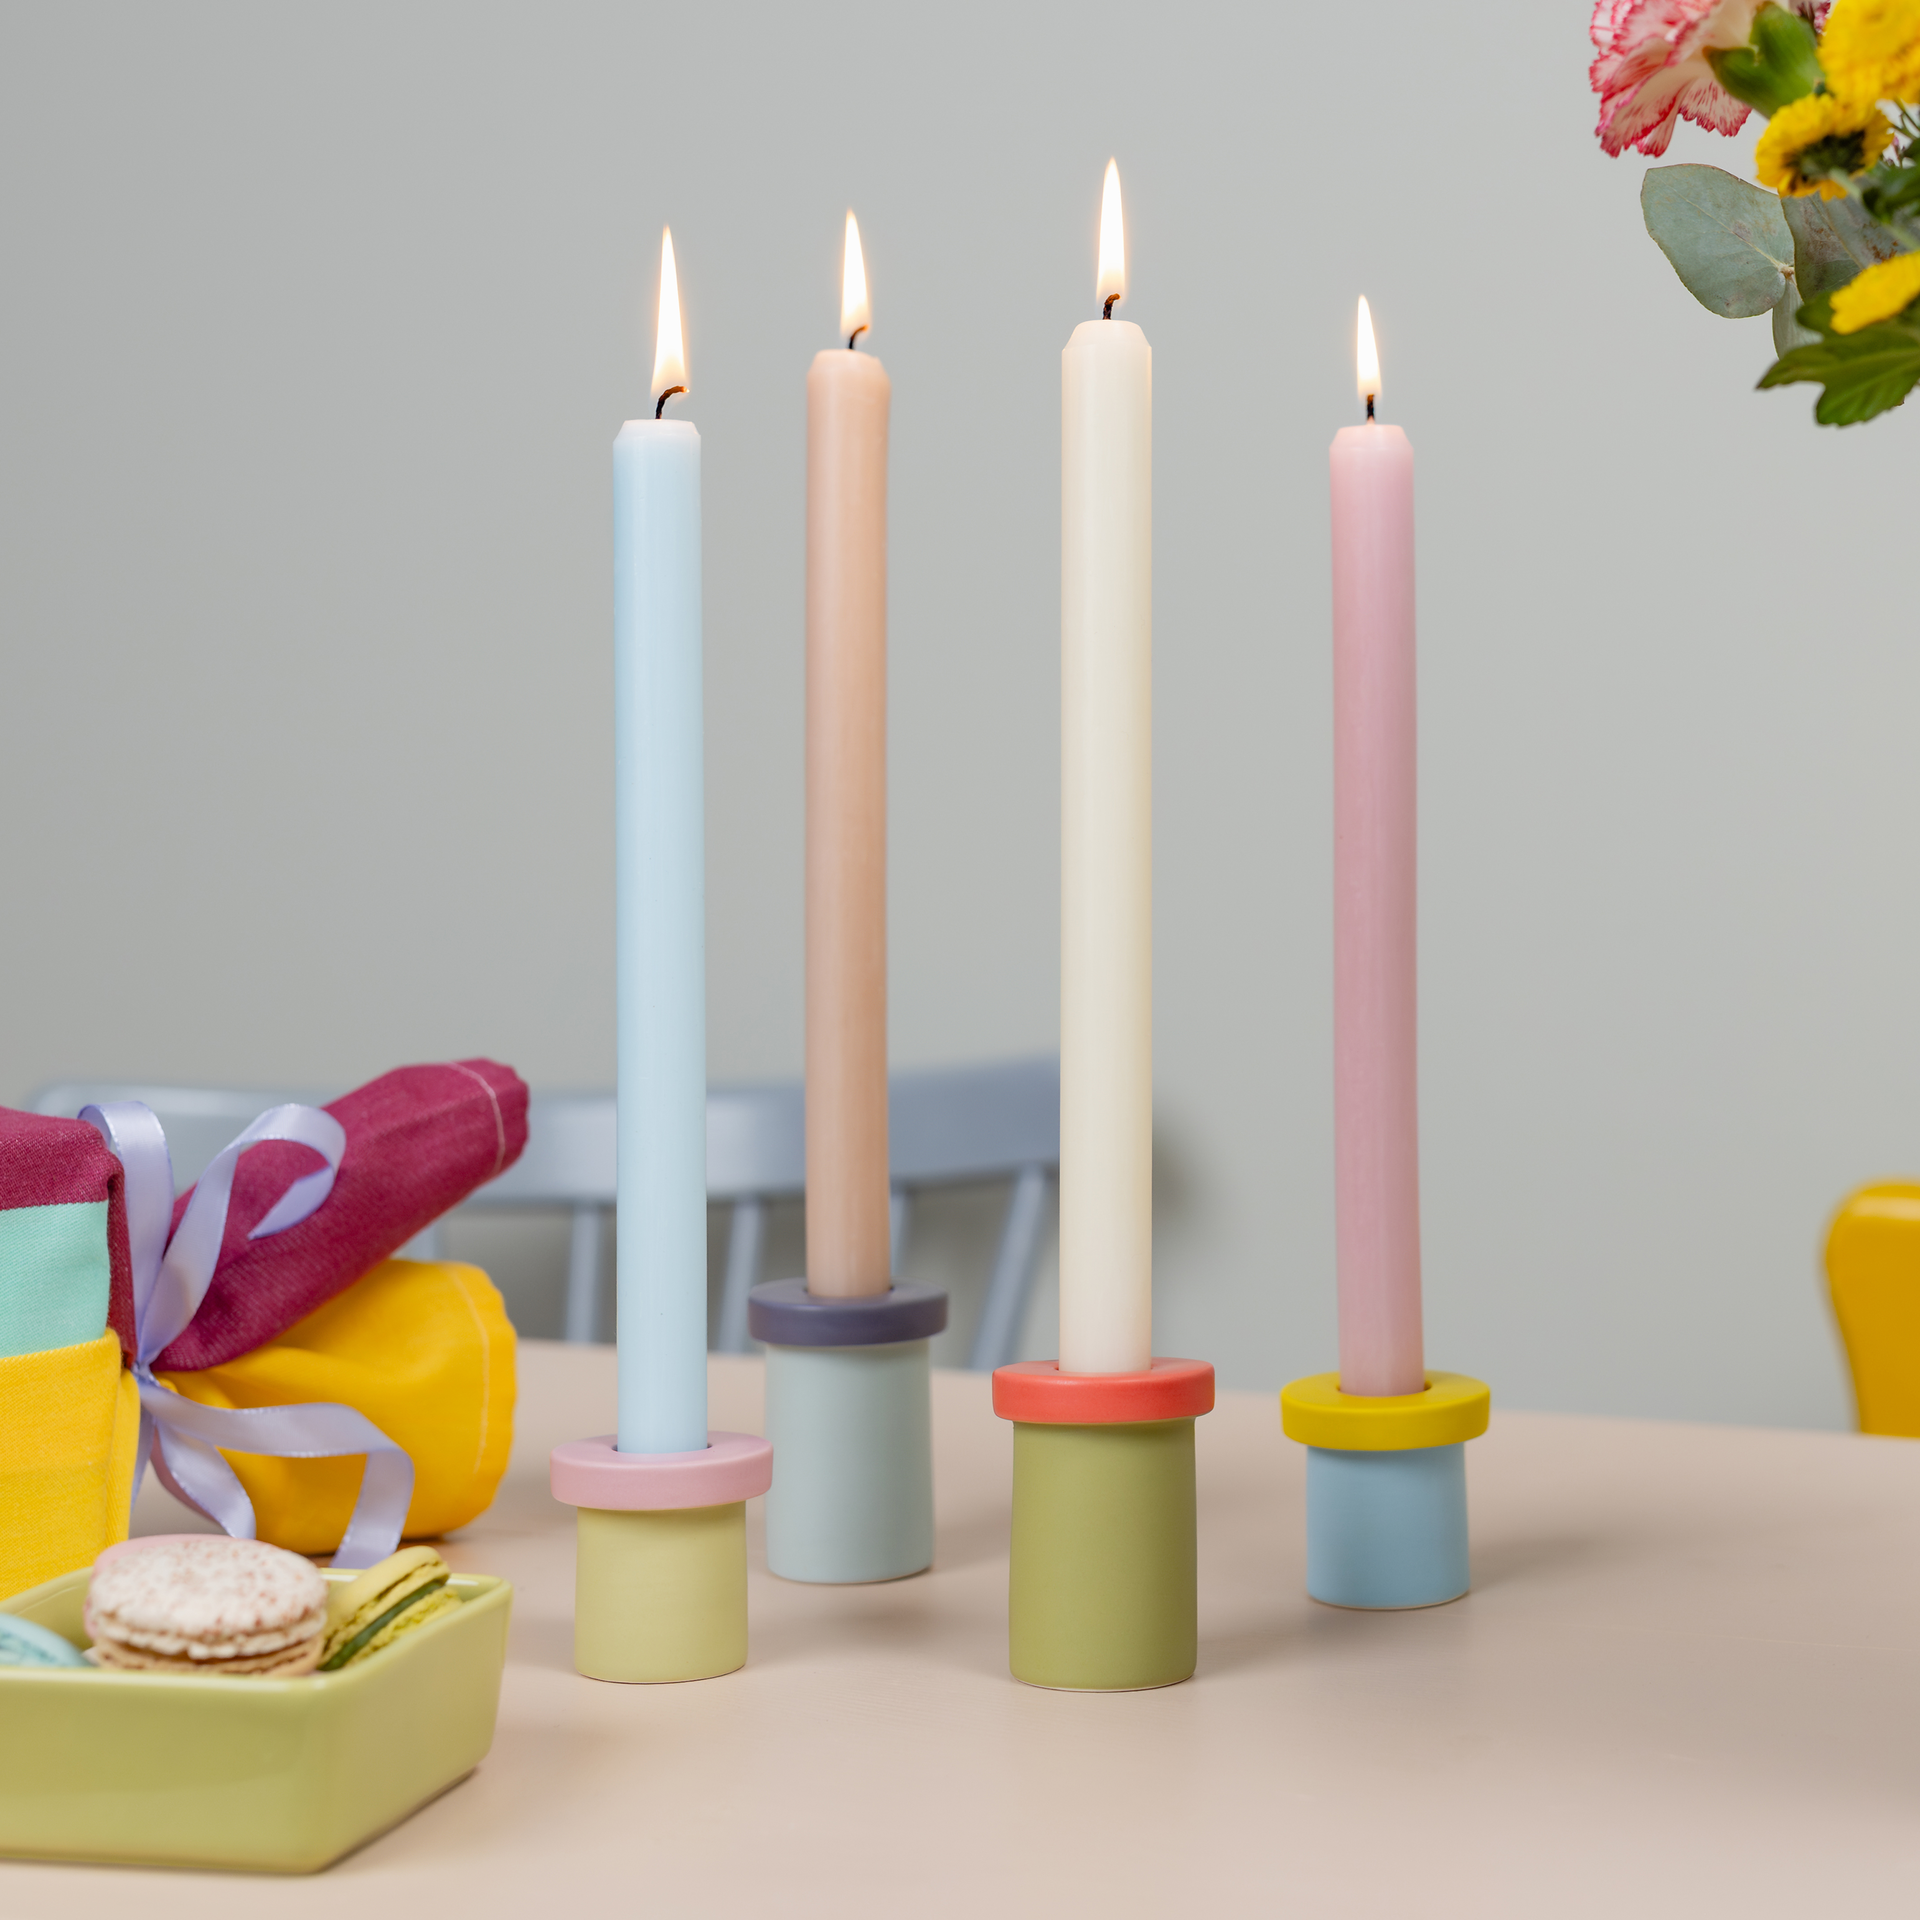 Candle Holder Set 'Pippo', set of 4